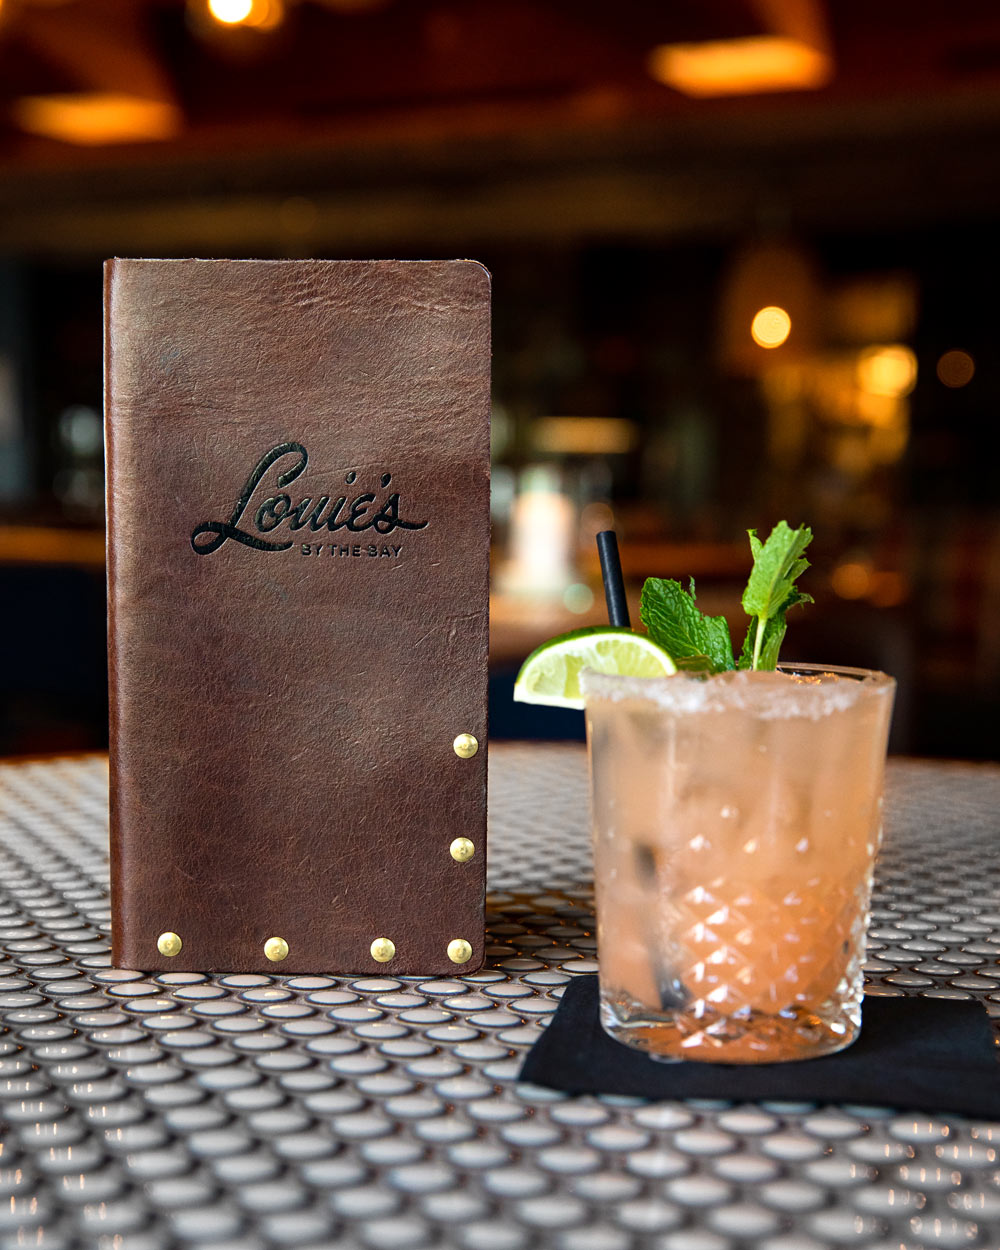 Leather Check Presenter with Louies By The Bay Restaurant Logo next to a mixed drink